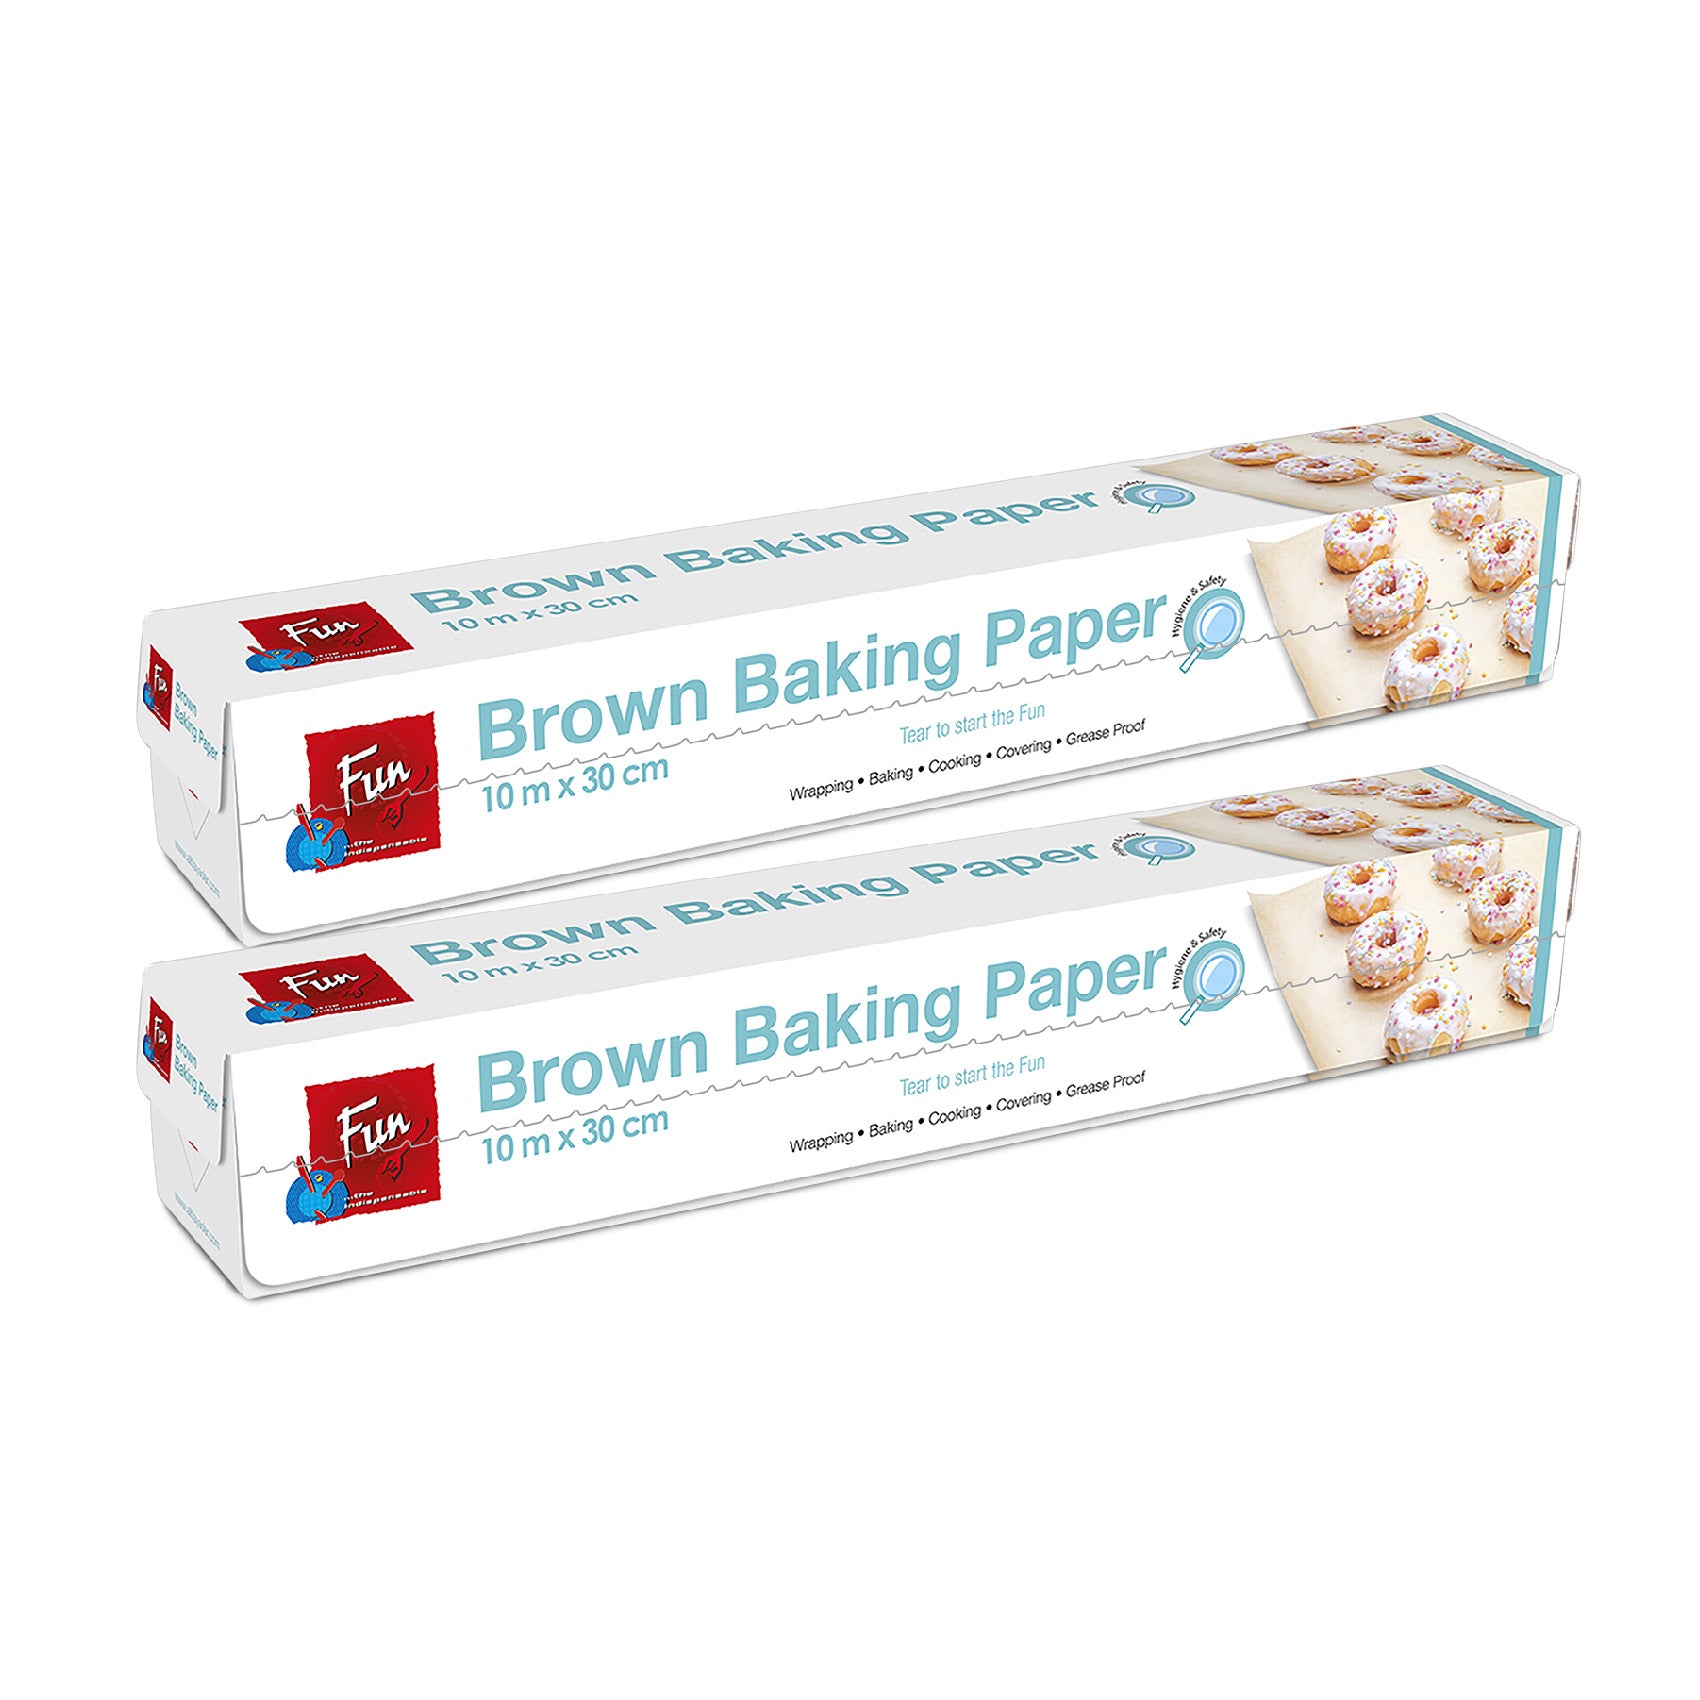 Fun® Indispensable Indispensable Silicon-Coated Baking Paper Roll 10mx30cm - Brown, Buy 1 Get 1